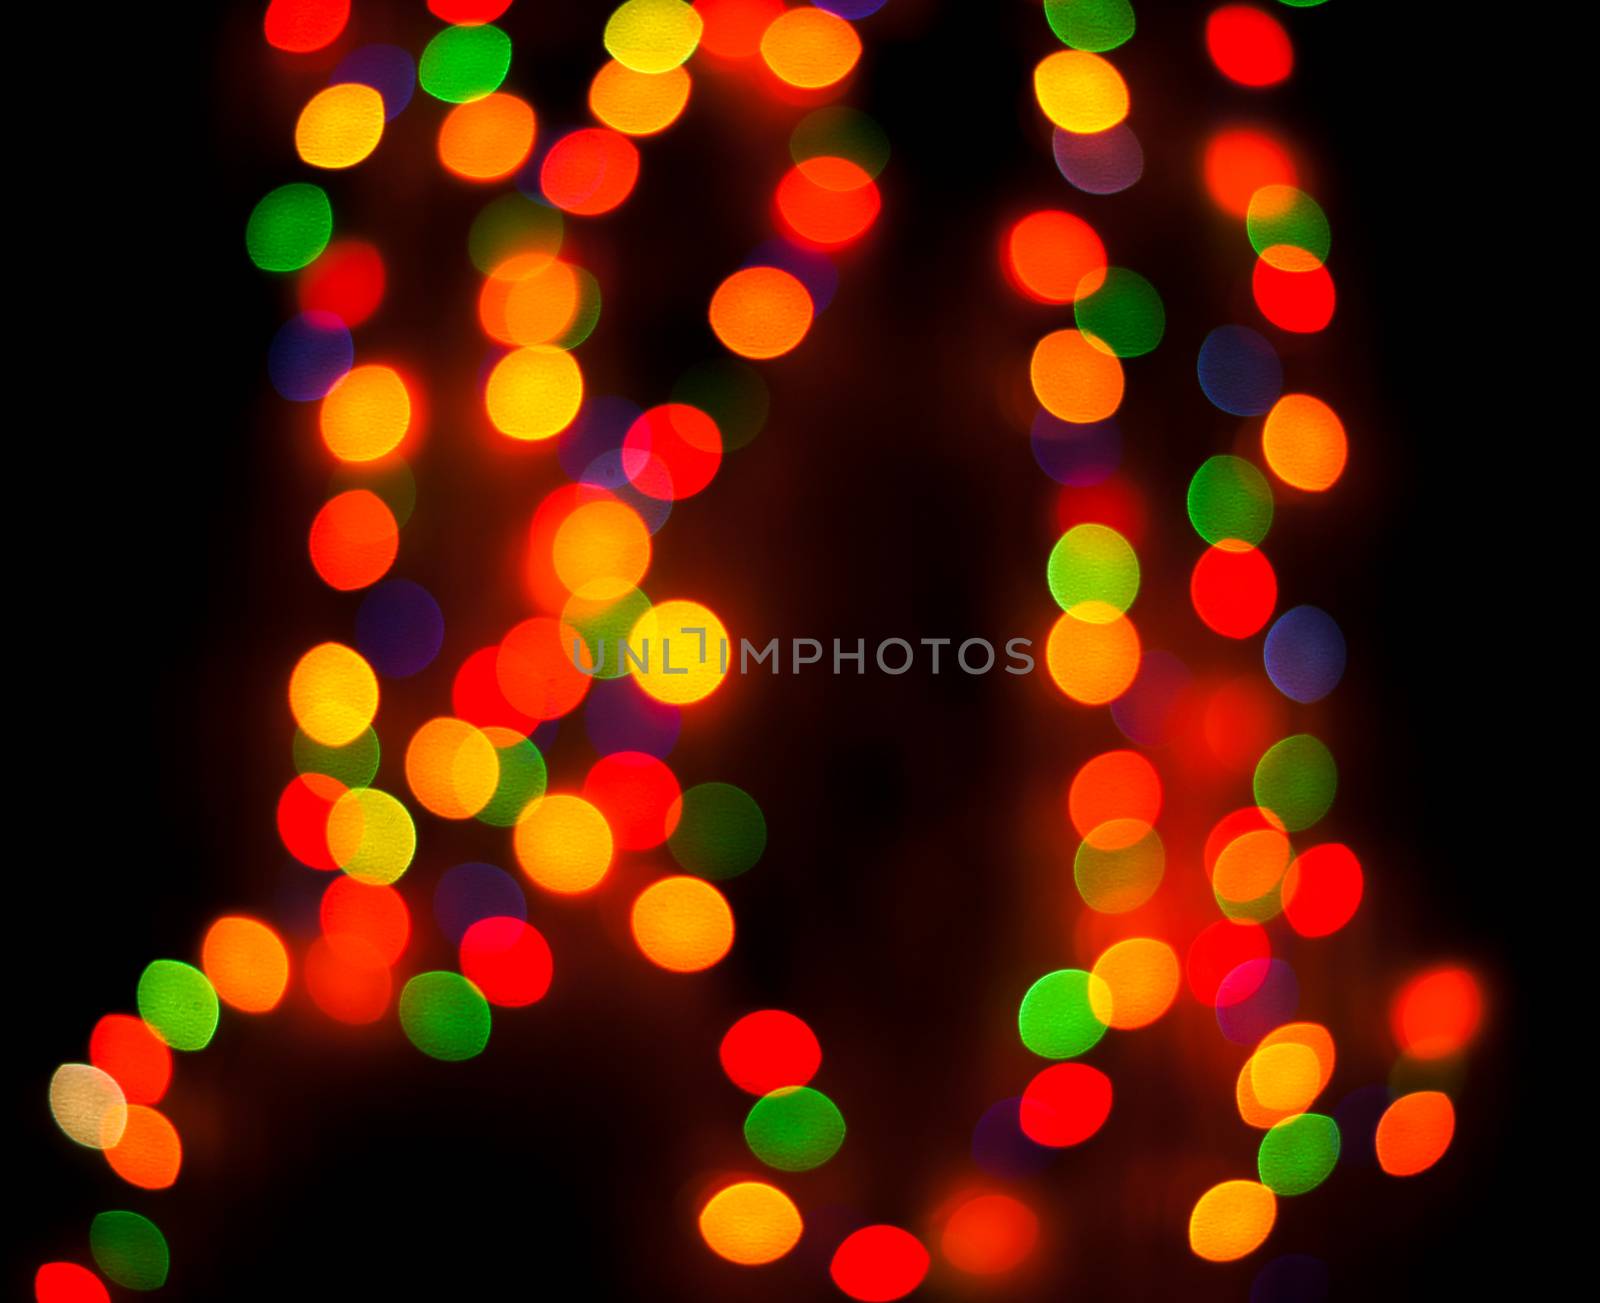 Background of defocused lights, or bokeh. For your commercial and editorial use.